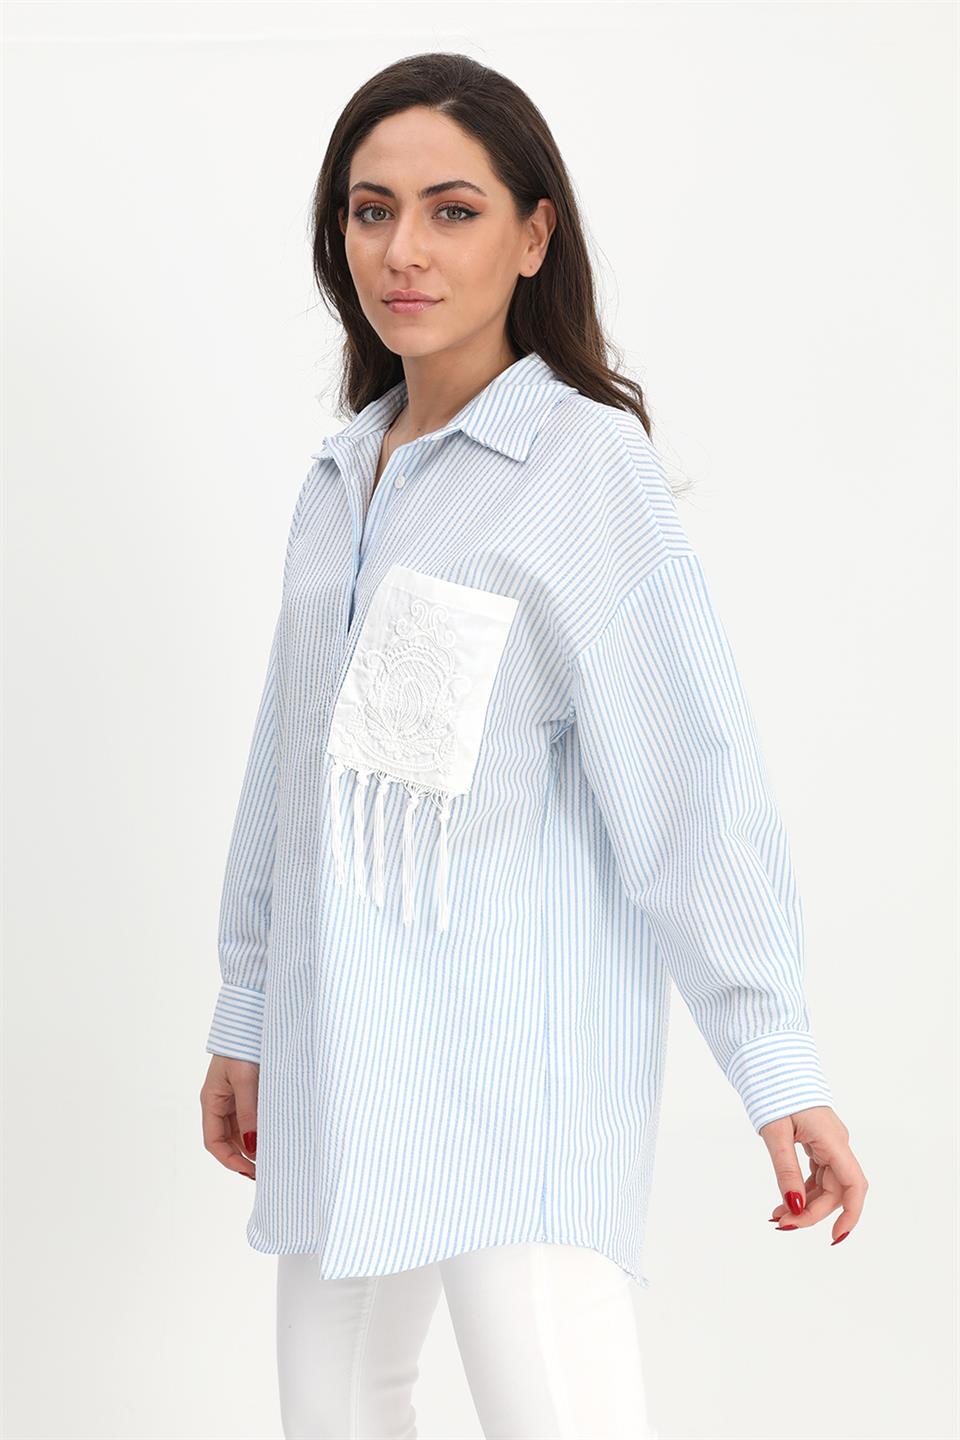 Women's Shirt Pocket Embroidery Tasseled See-through - Blue - STREETMODE™